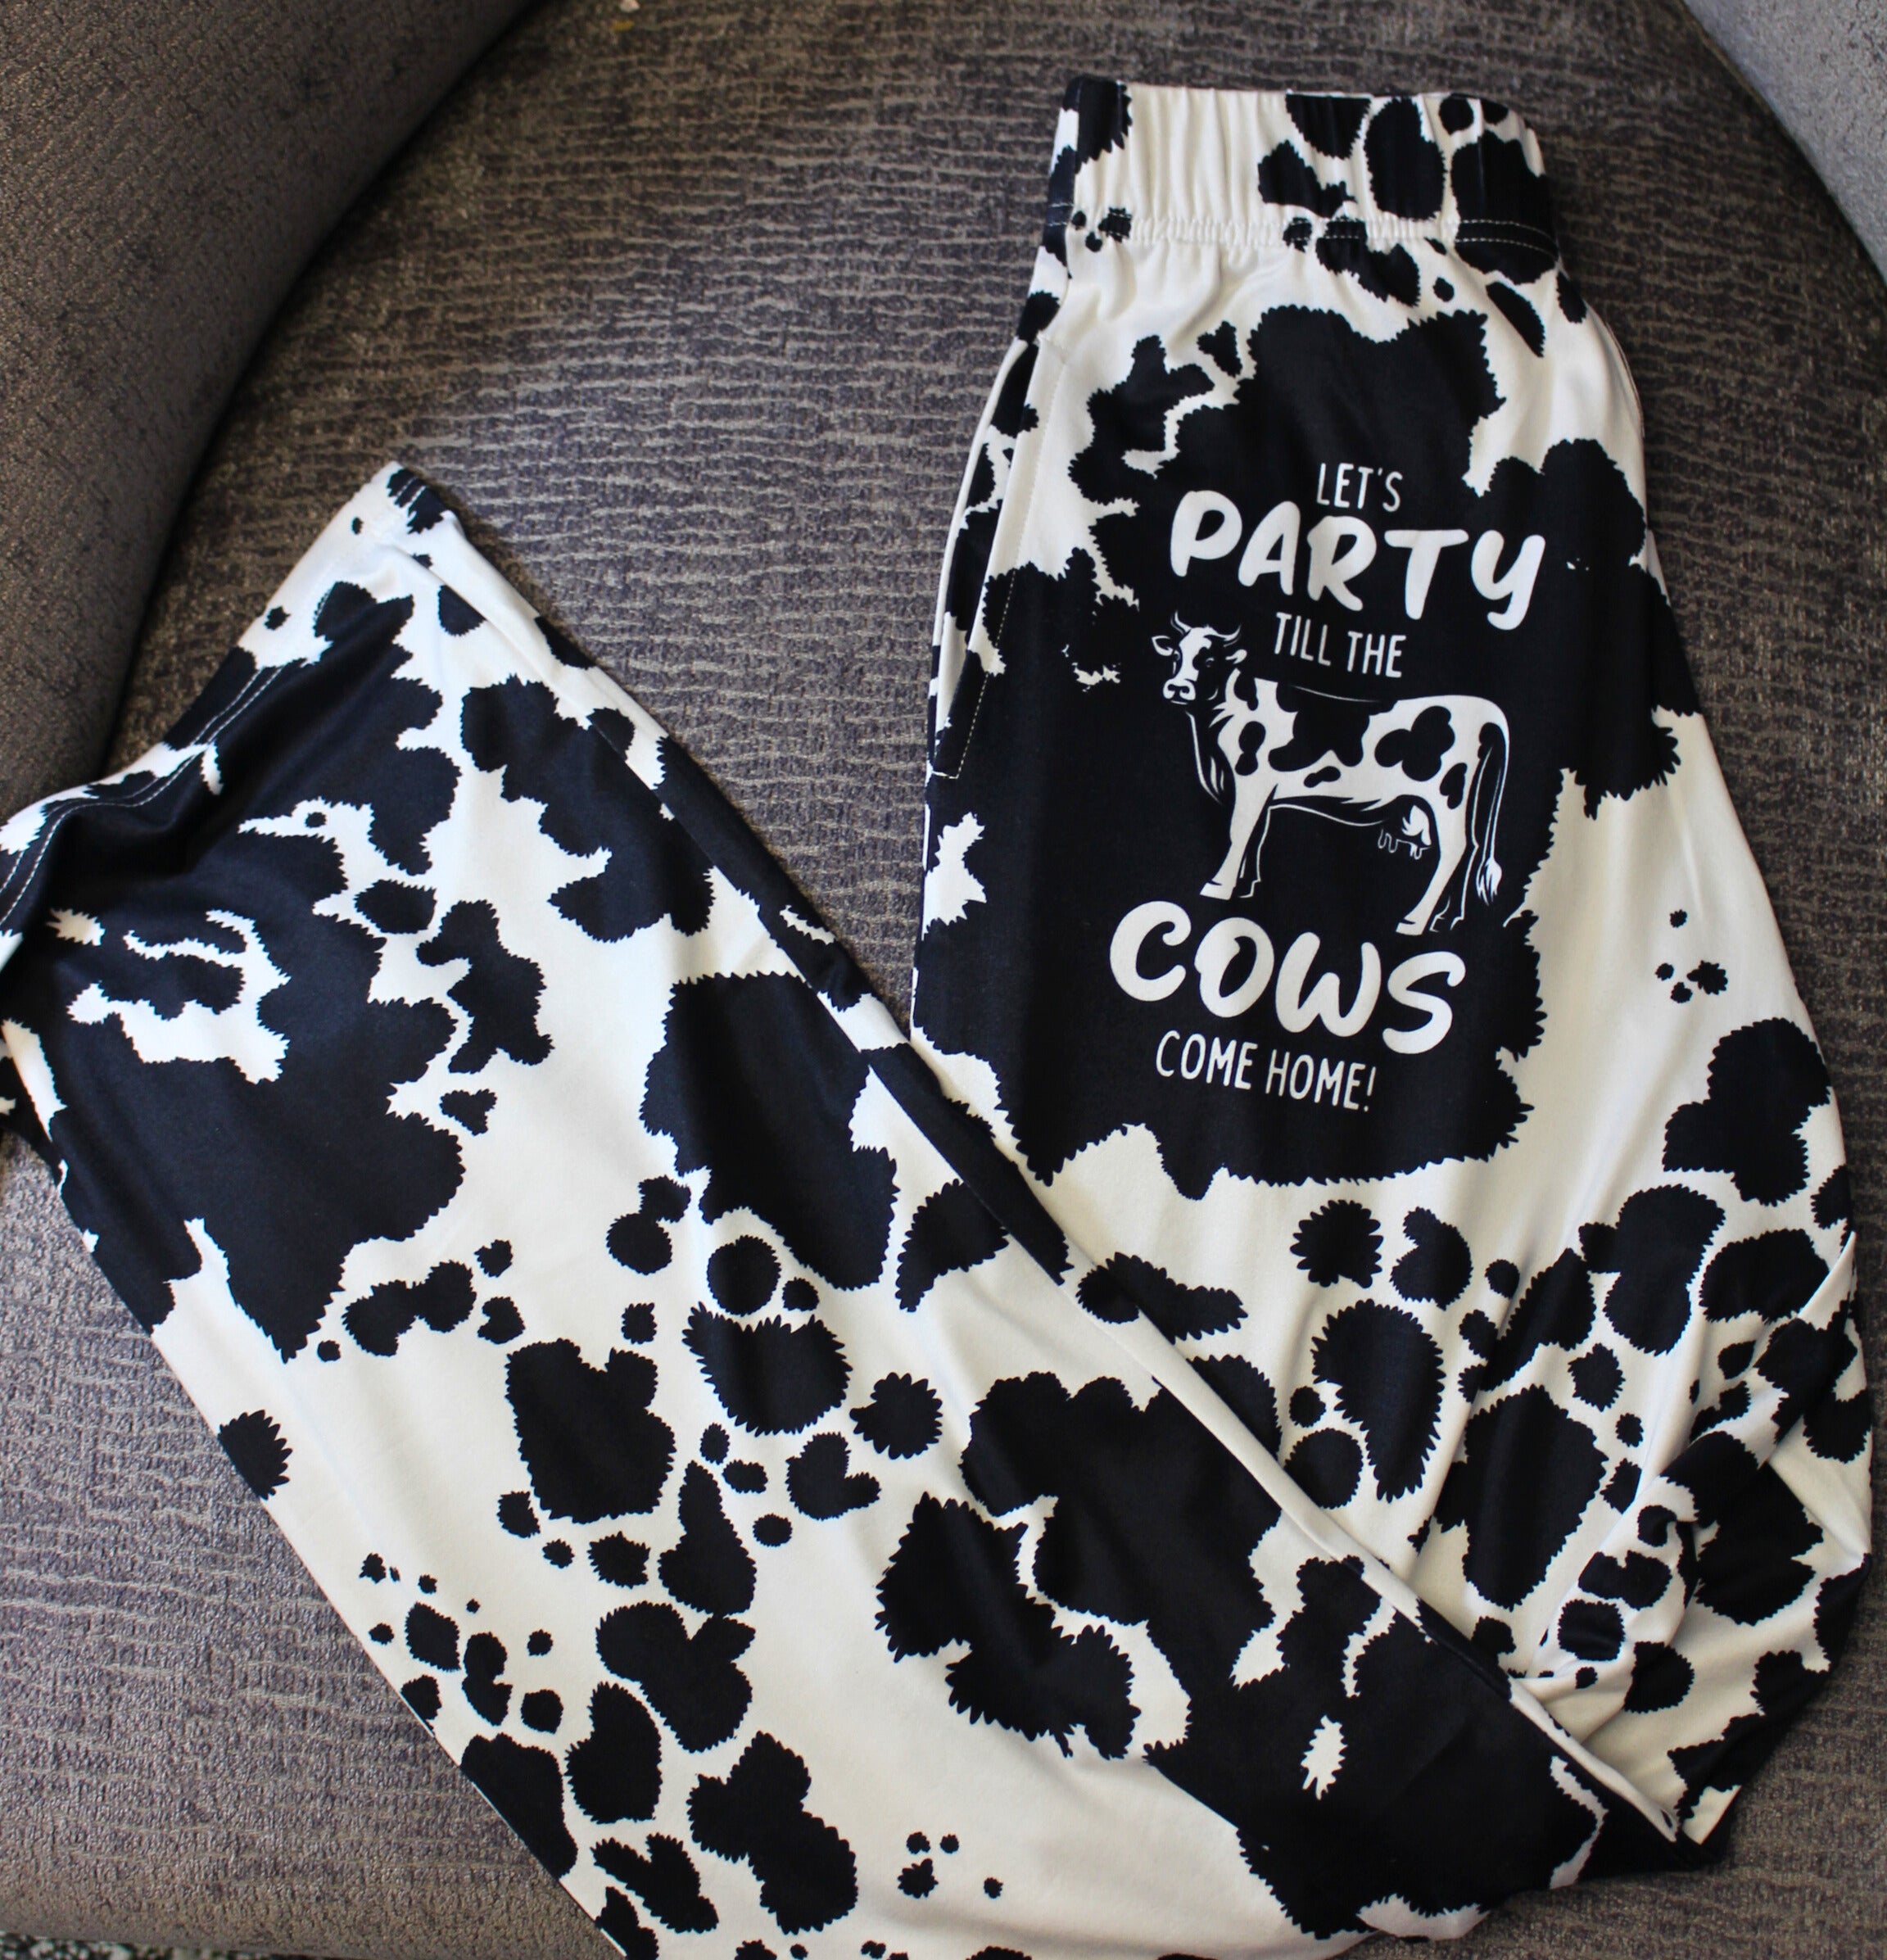 Party 'Till The Cows Come Home pajama lounge pants laid out on a gray chair